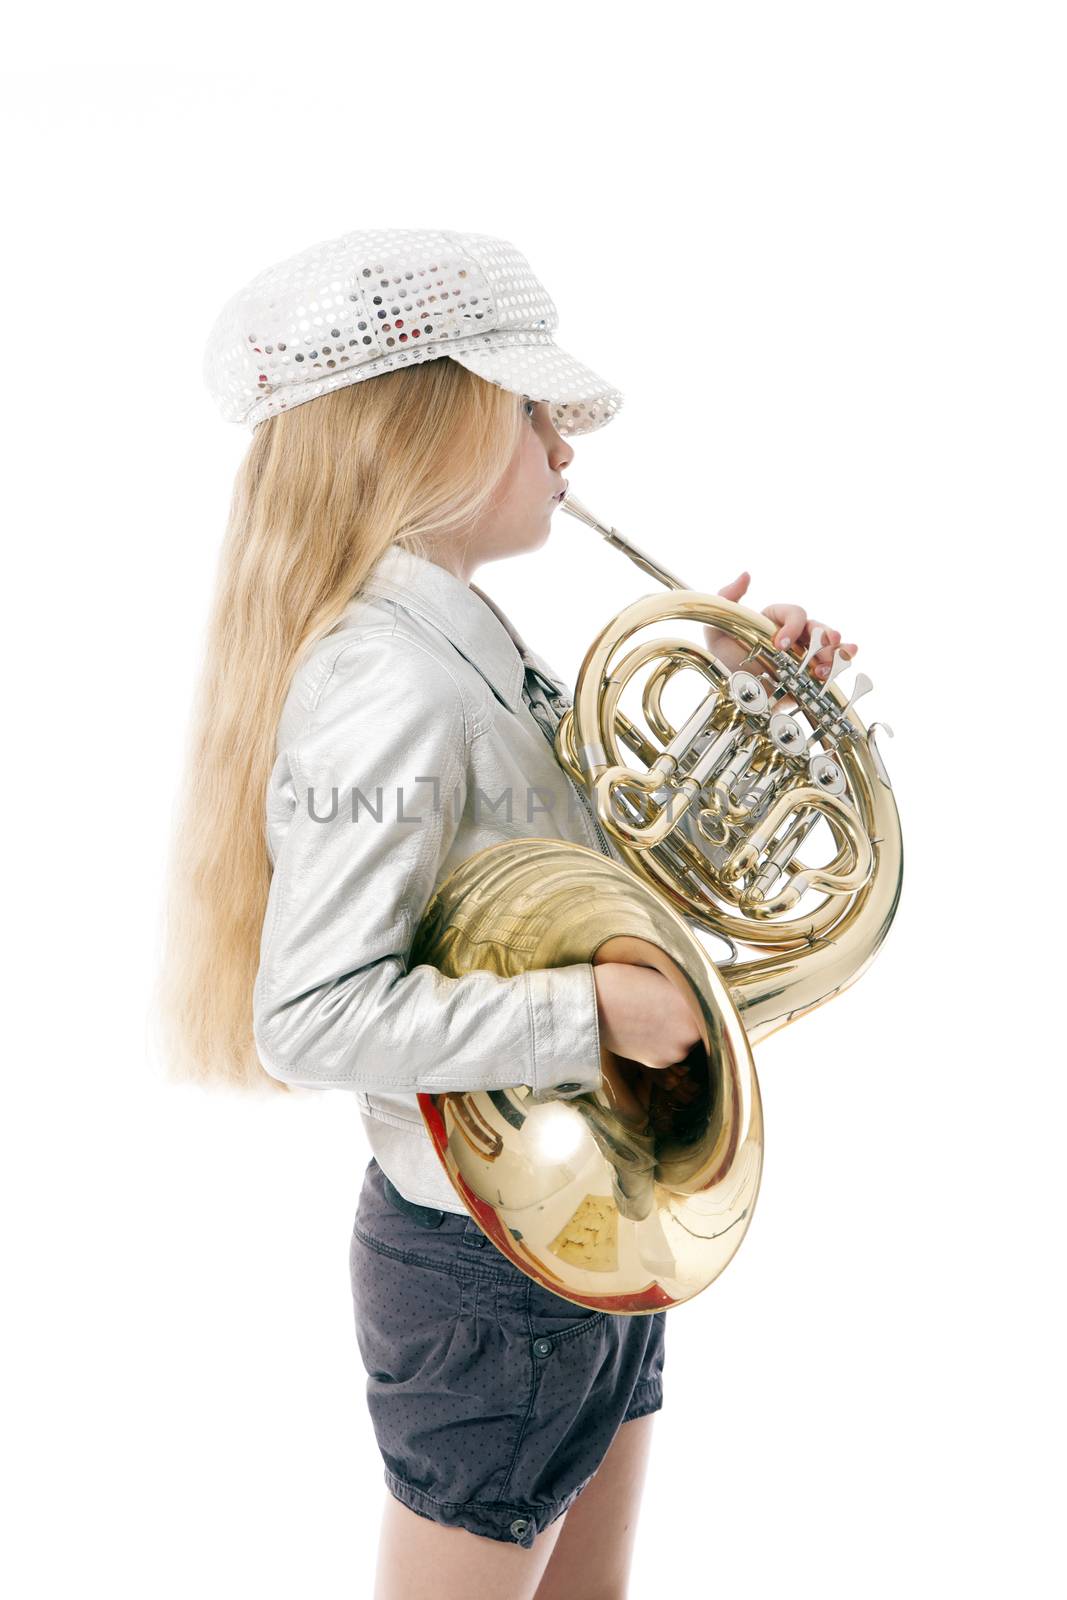 young girl with cap playing french horn against white background